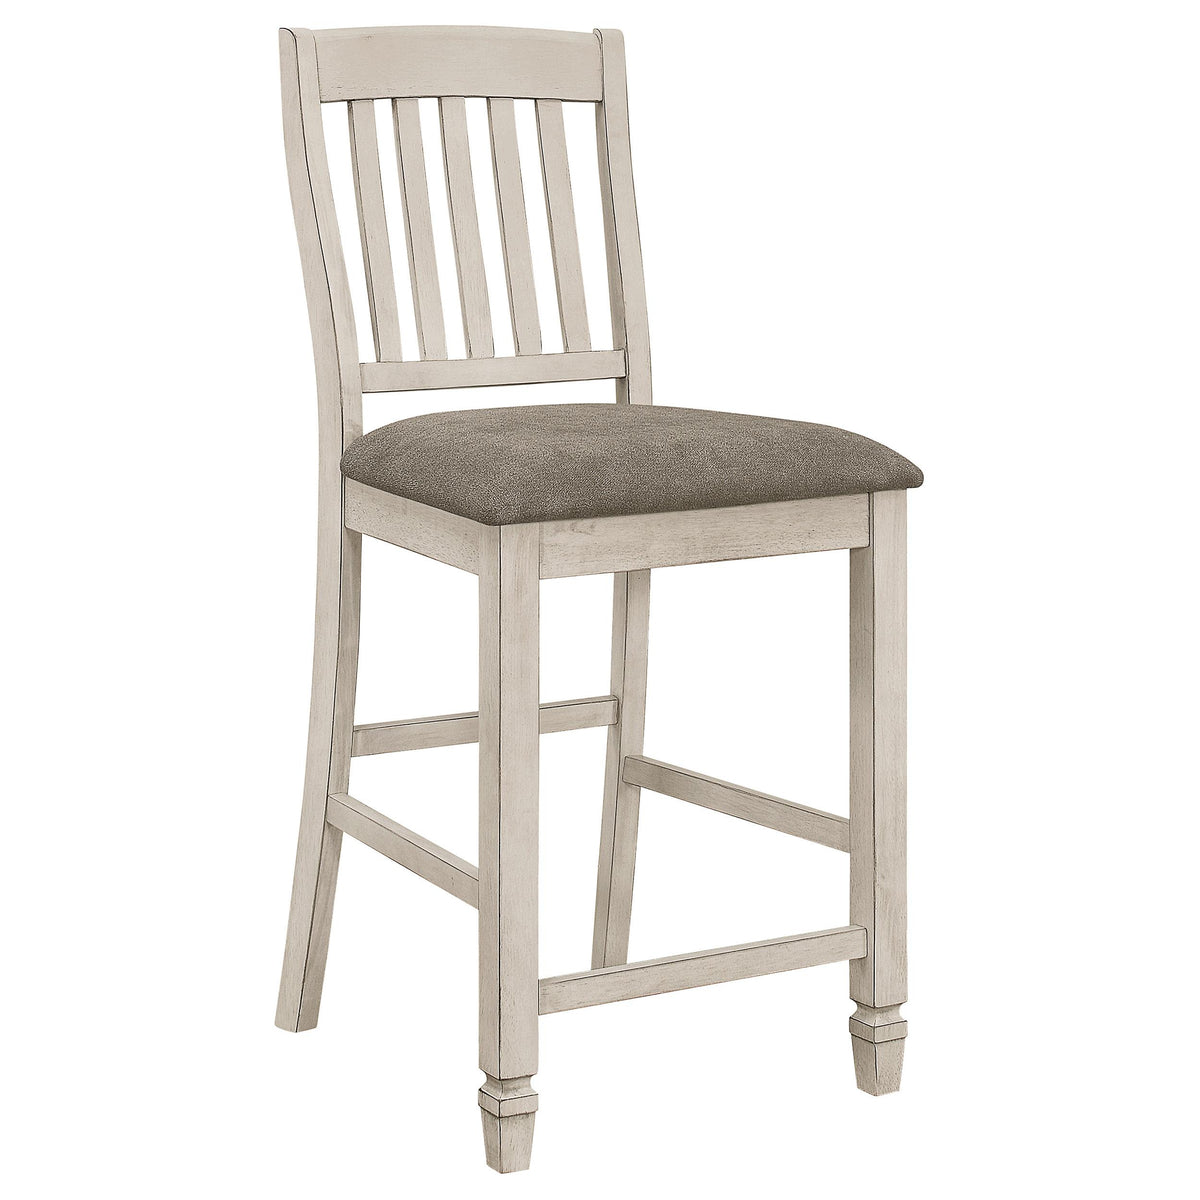 Sarasota Slat Back Counter Height Chairs Grey and Rustic Cream (Set of 2)  Las Vegas Furniture Stores